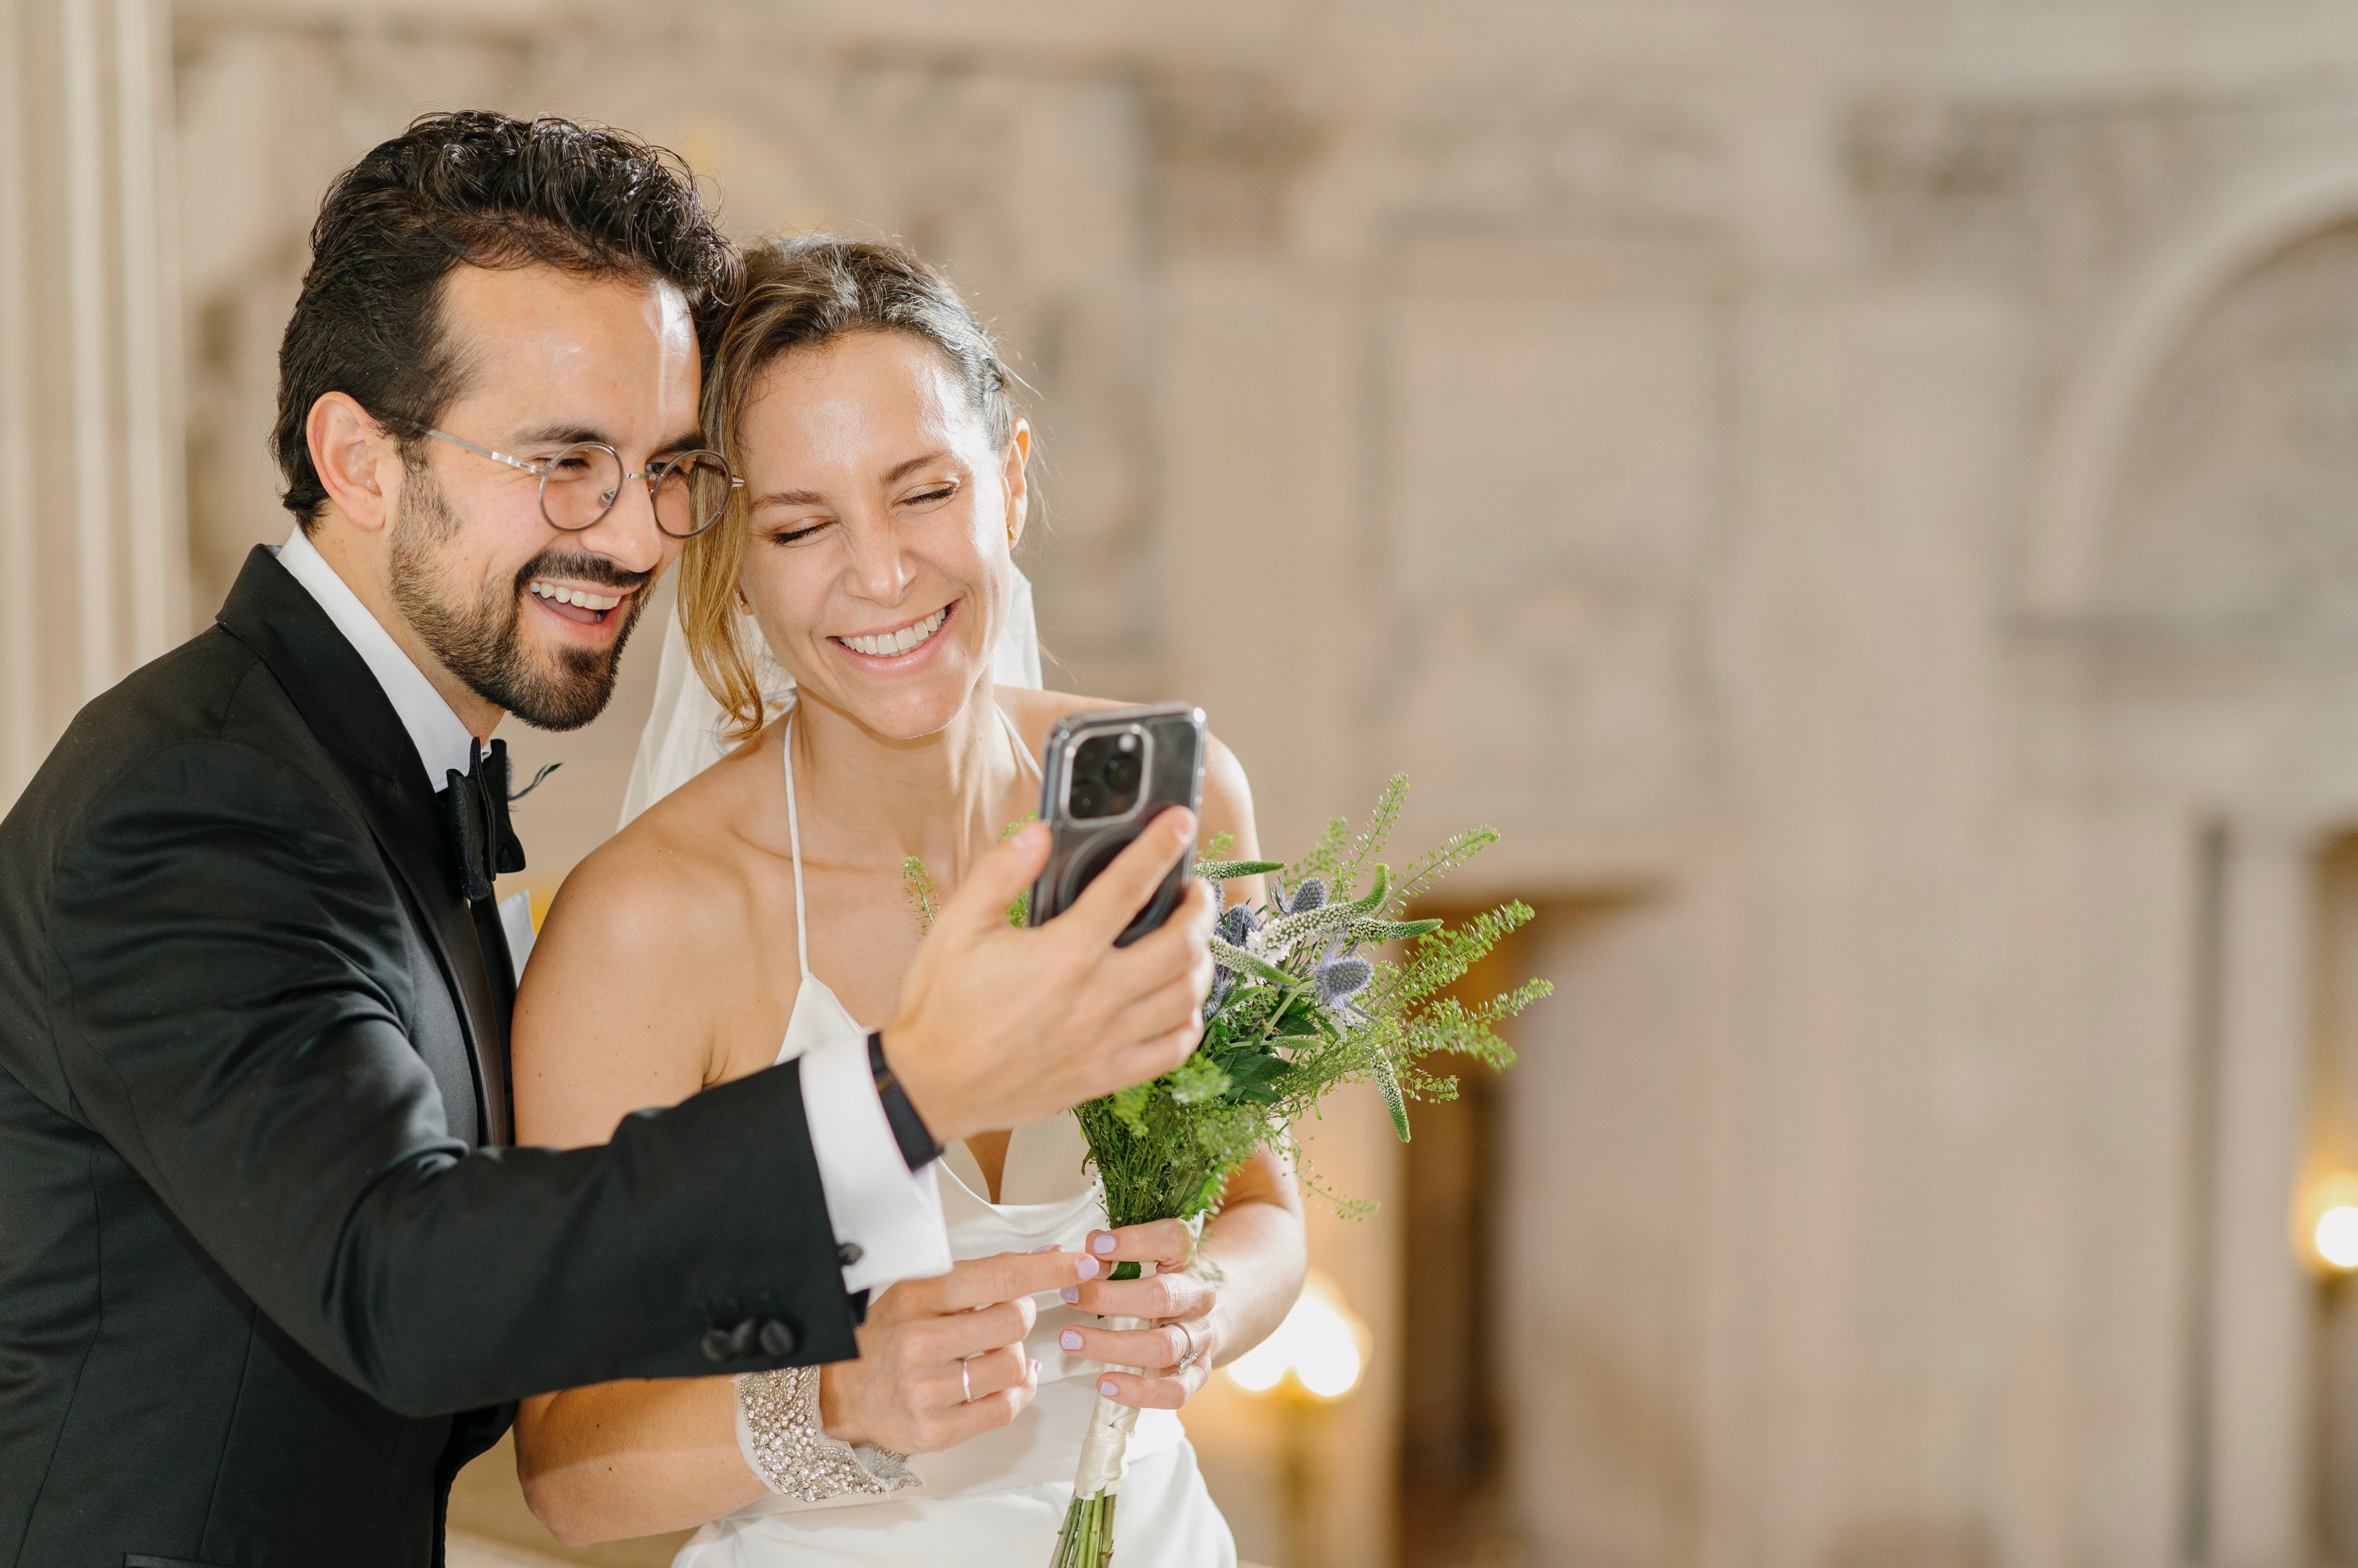 A smiling bride and groom in wedding attire share a joyful moment and look at a smartphone.